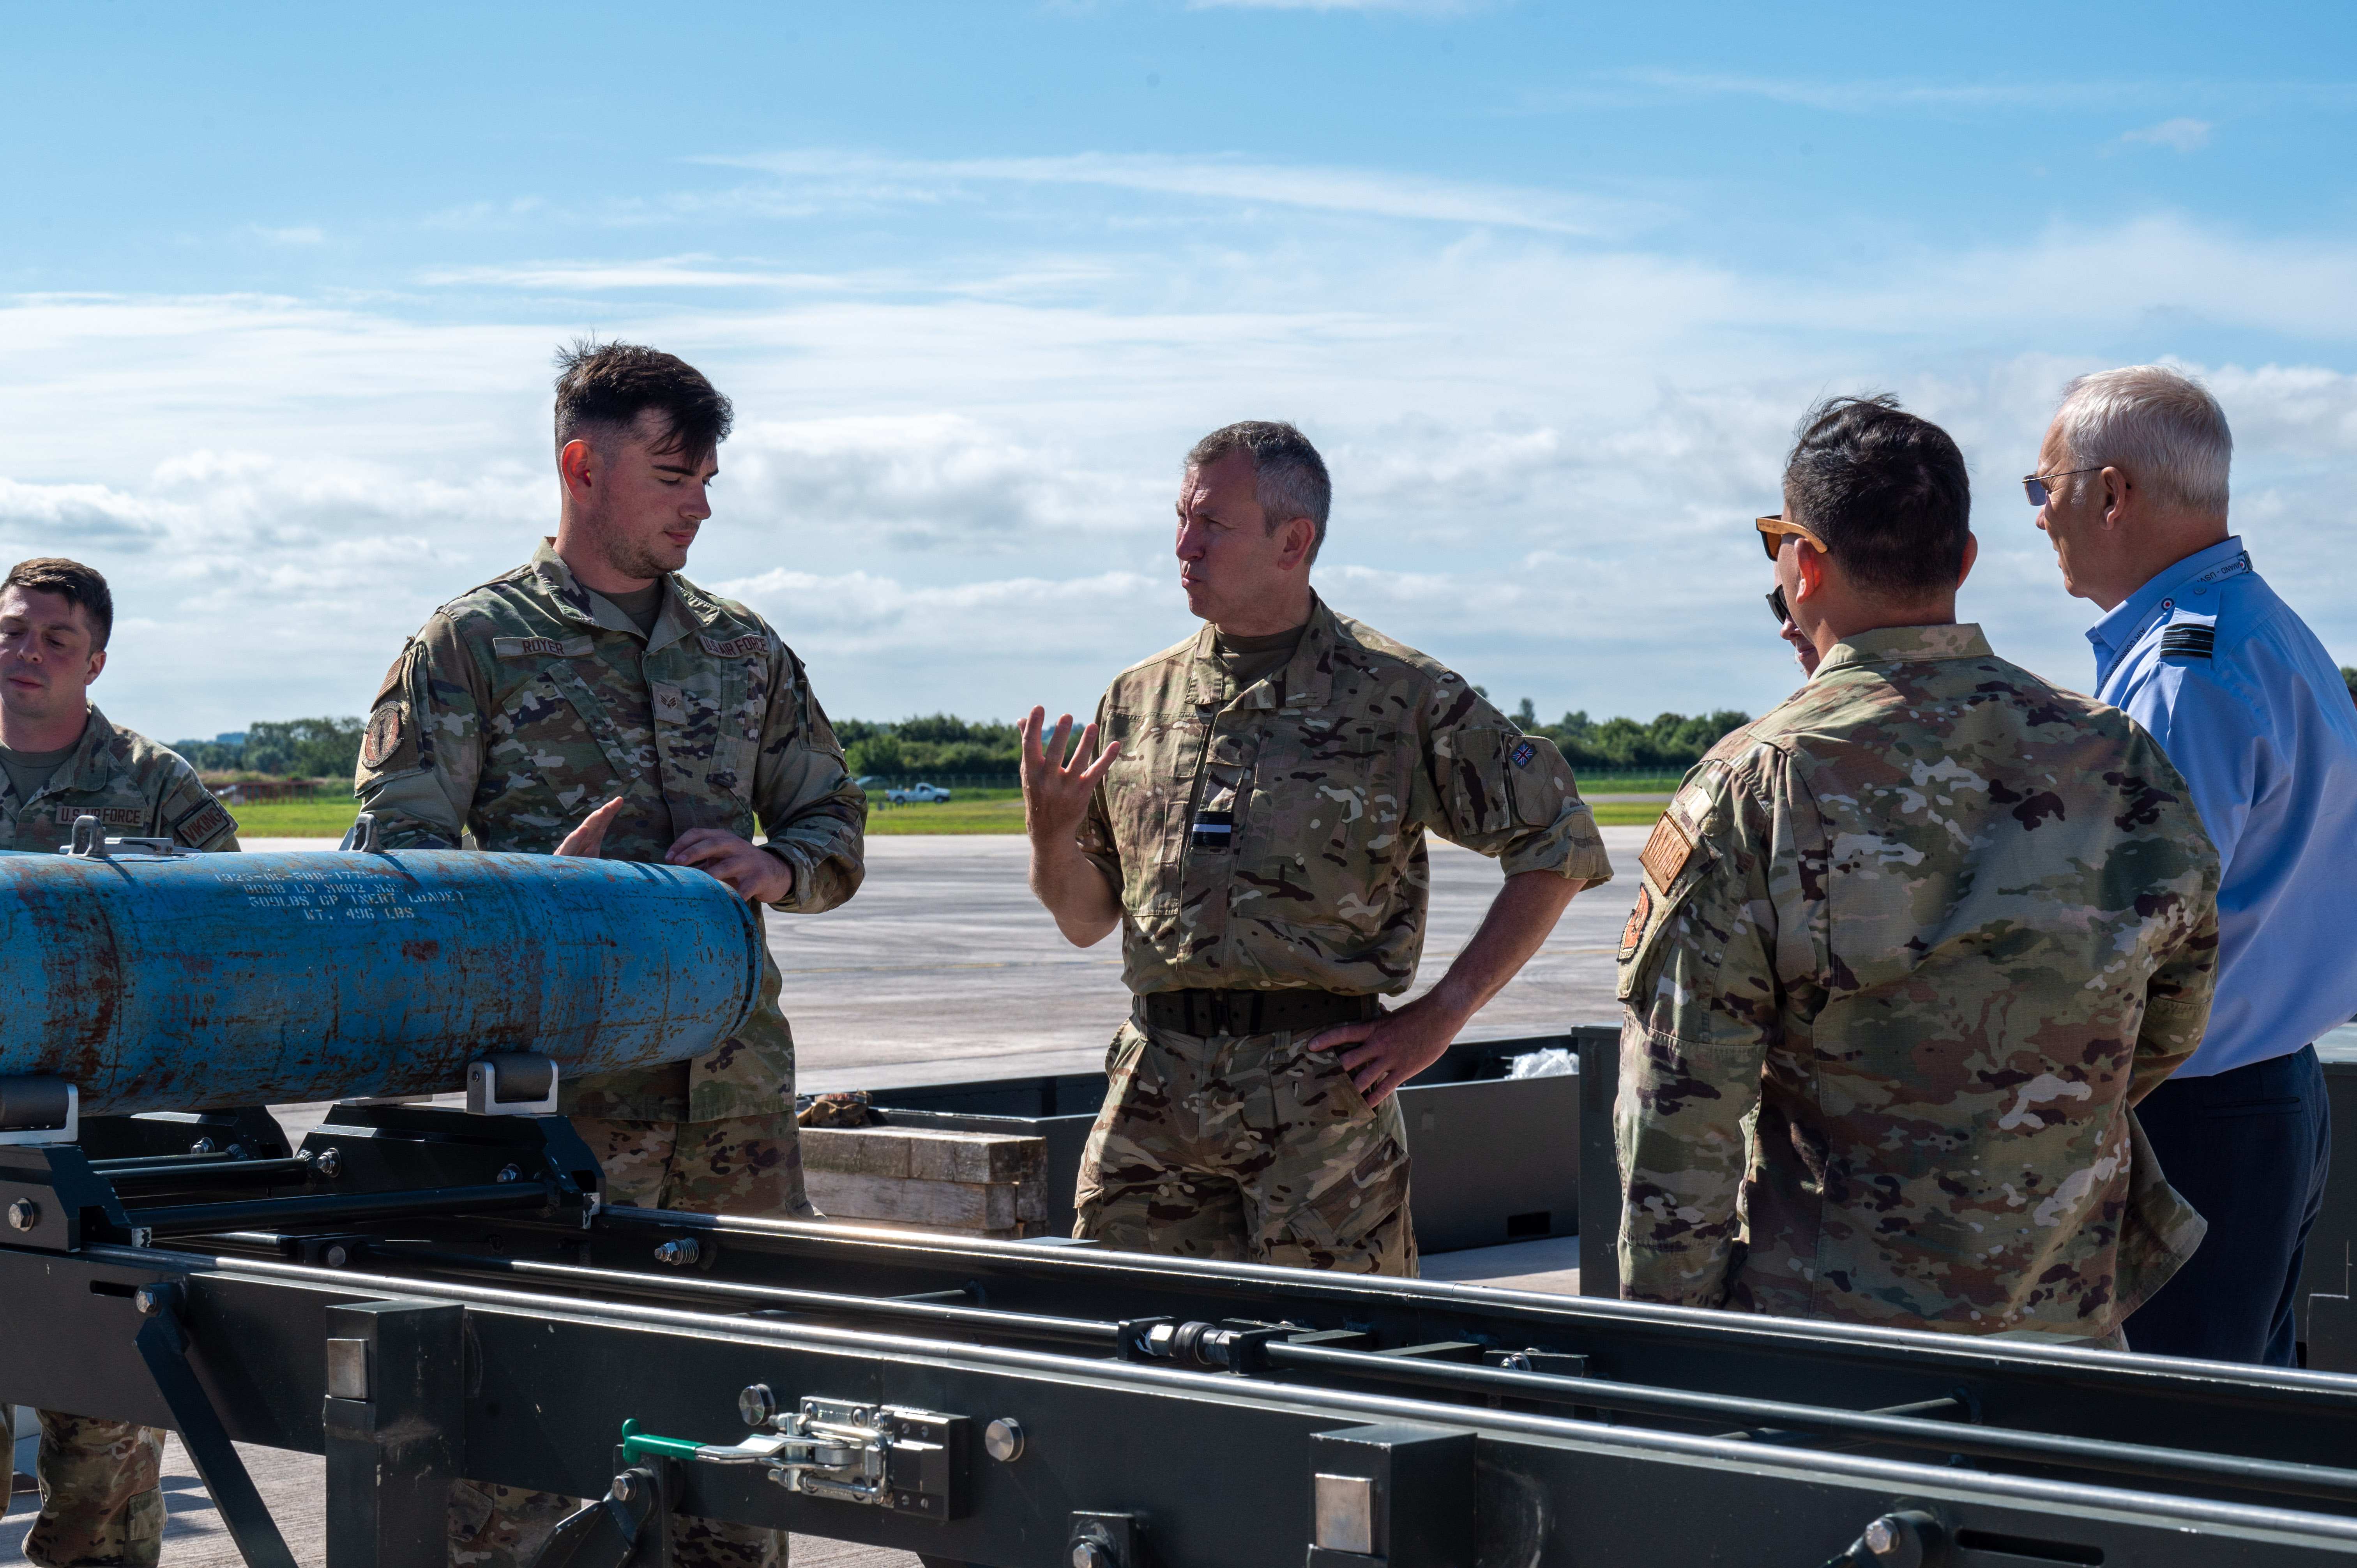 RAF and USAF personnel working together with the bombs